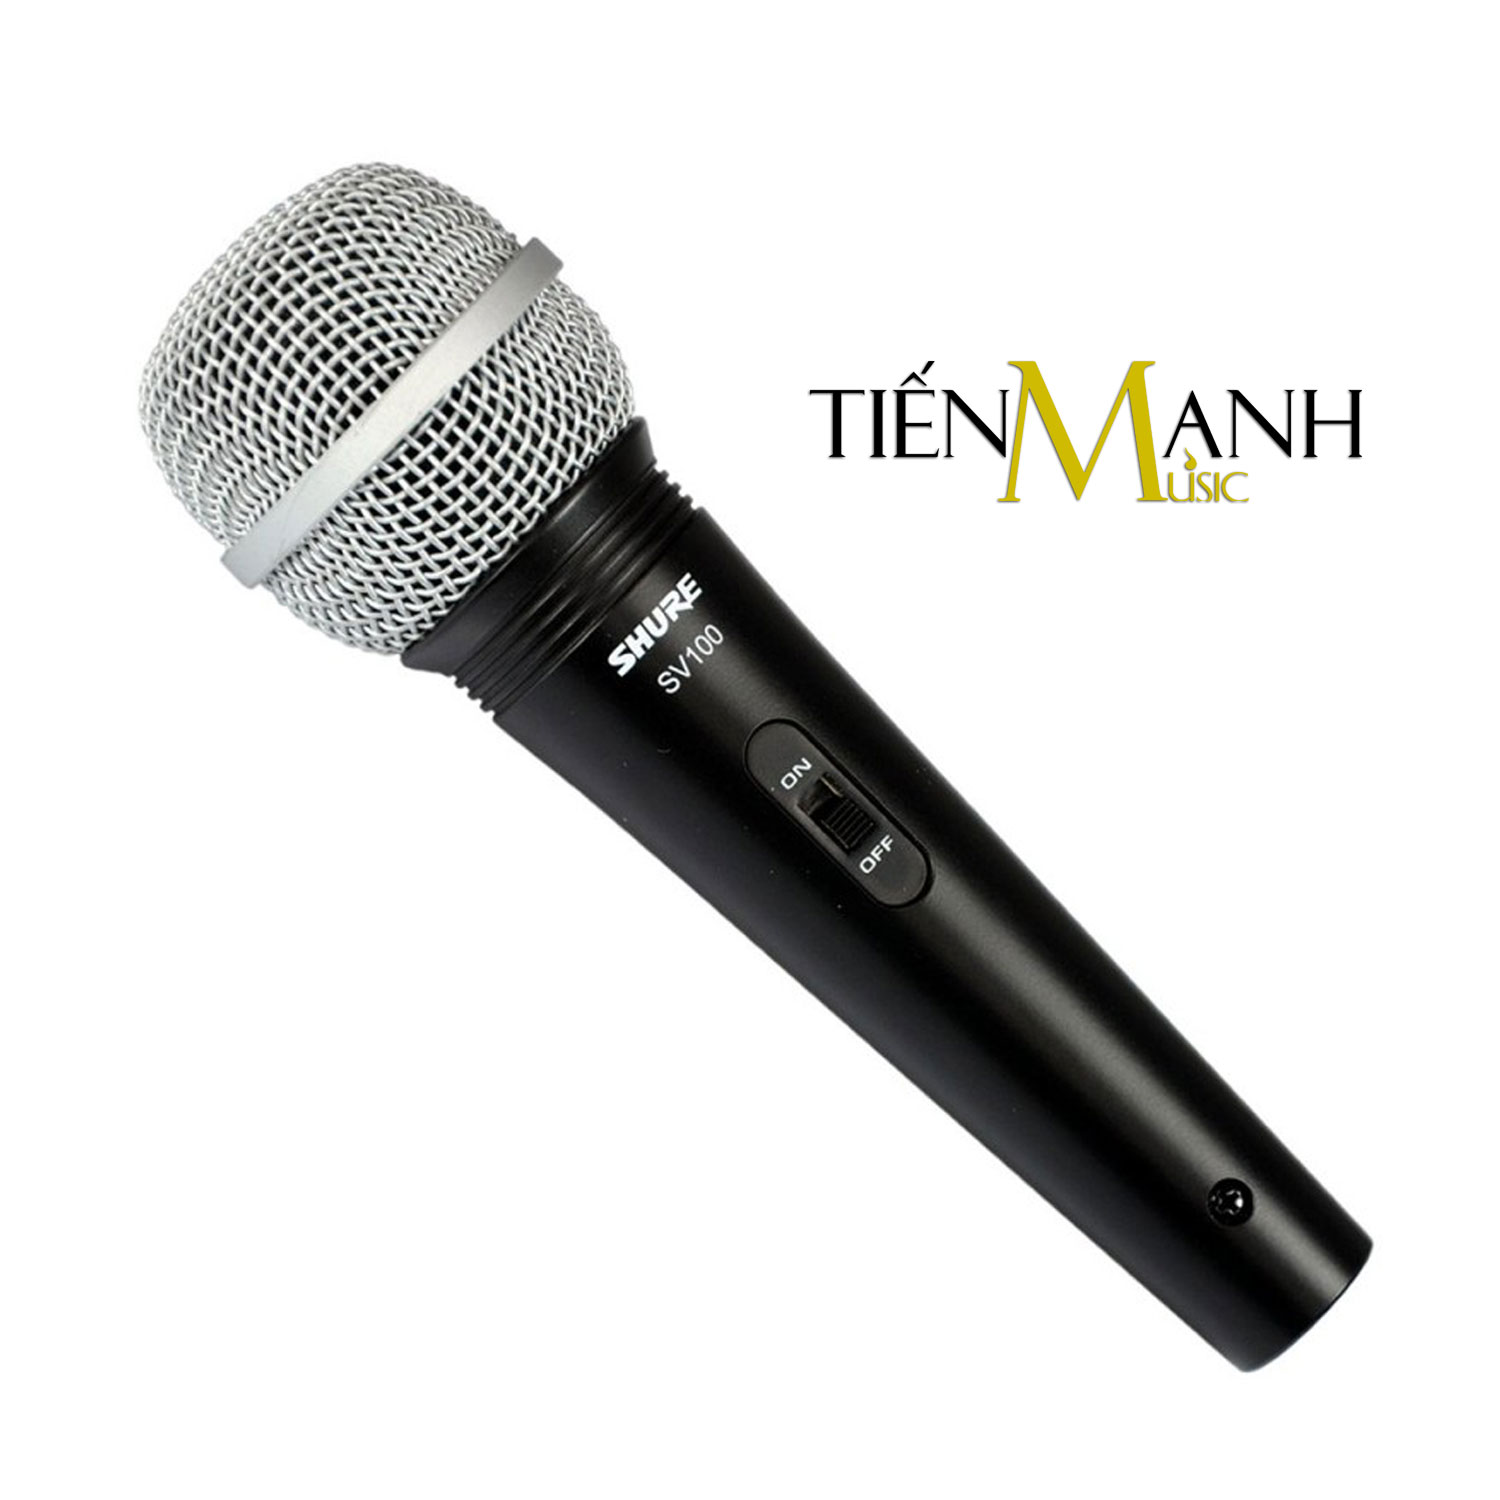 Cach-su-dung-Mic-Shure-SV100-Co-Day-Cam-Tay-Vocal-Microphone-Karaoke.jpg